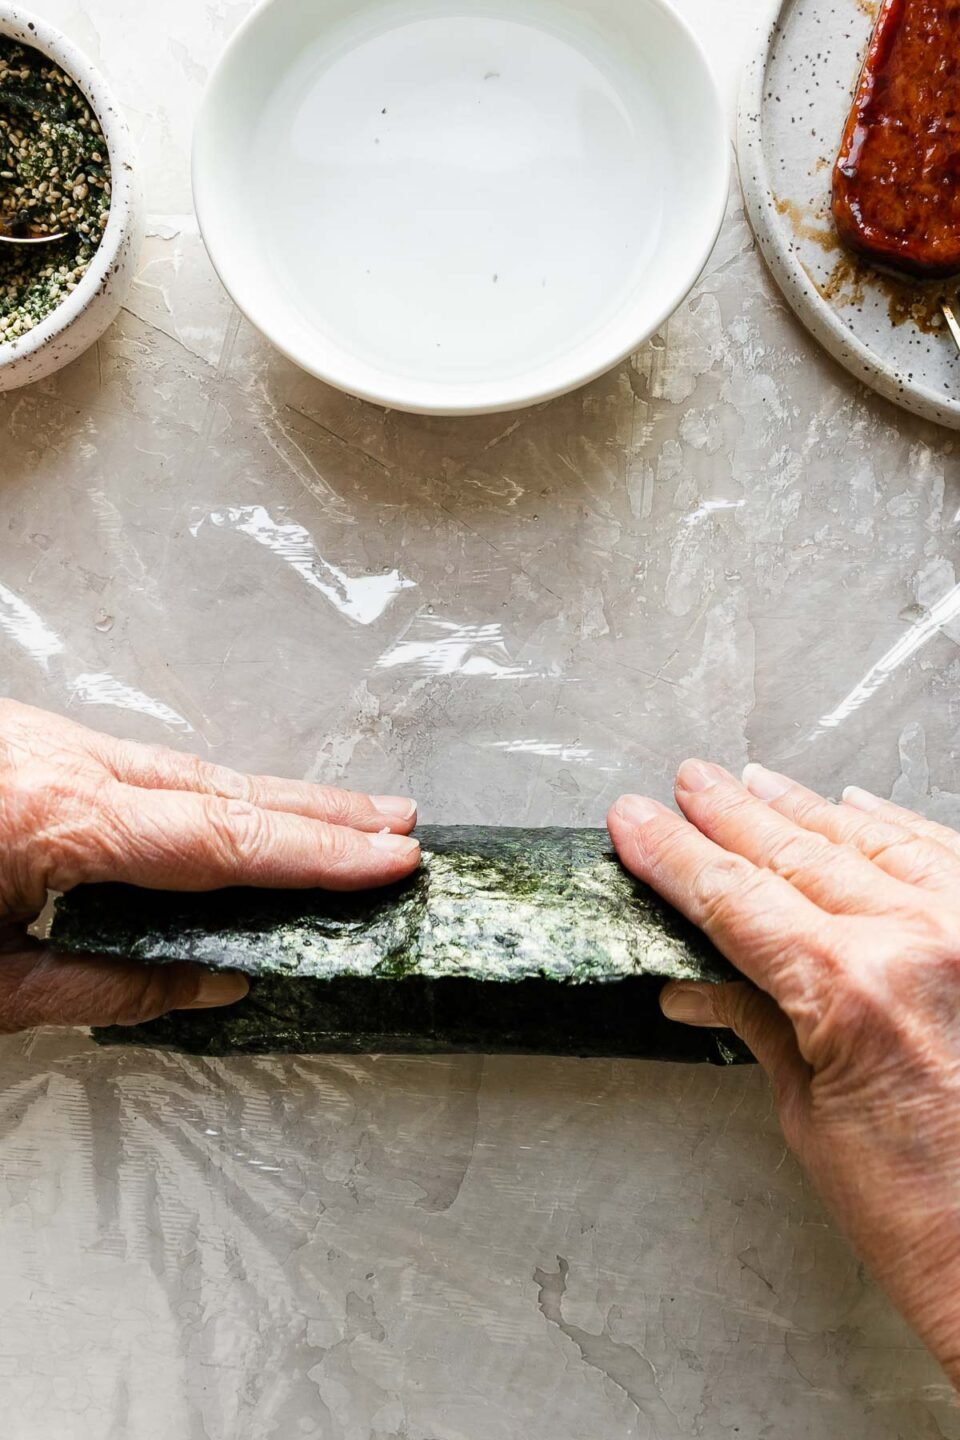 A close up of a woman's hands working to roll a partially wrapped musubi away from herself until it is sealed shut. Positioned just above the almost finished musubi is a small bowl filled with furikake seasoning with a spoon resting inside, another small white bowl filled with water, and a small speckled ceramic plate with pan-fried teriyaki Spam.